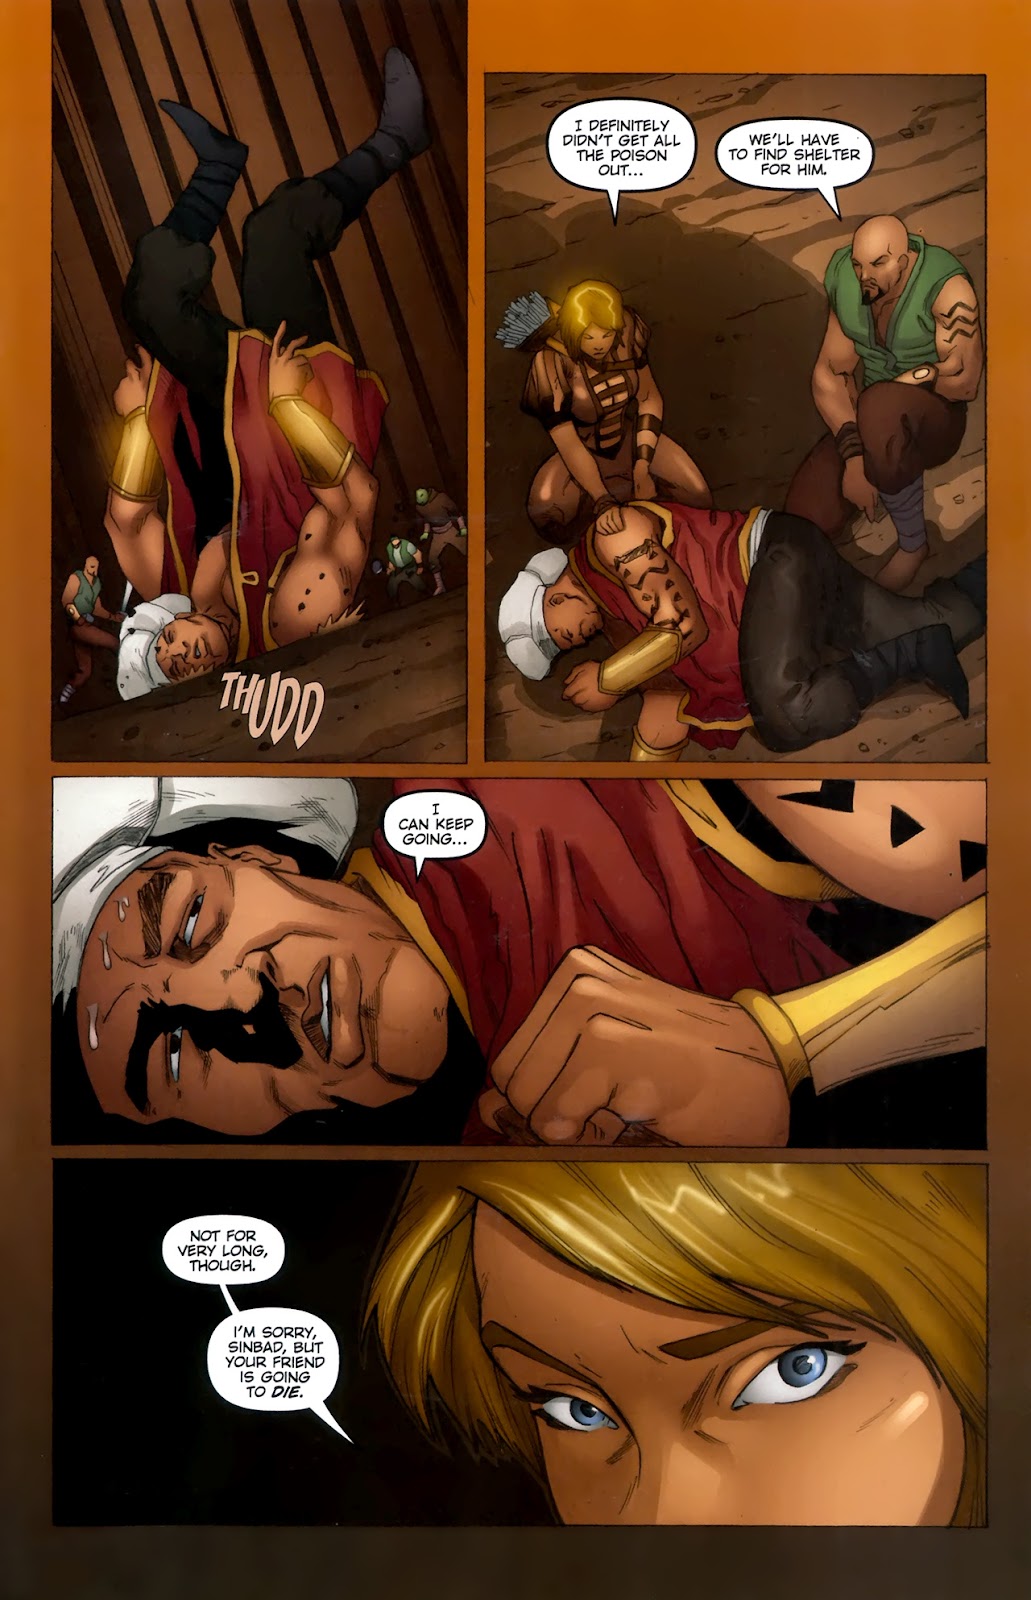 1001 Arabian Nights: The Adventures of Sinbad issue 11 - Page 23